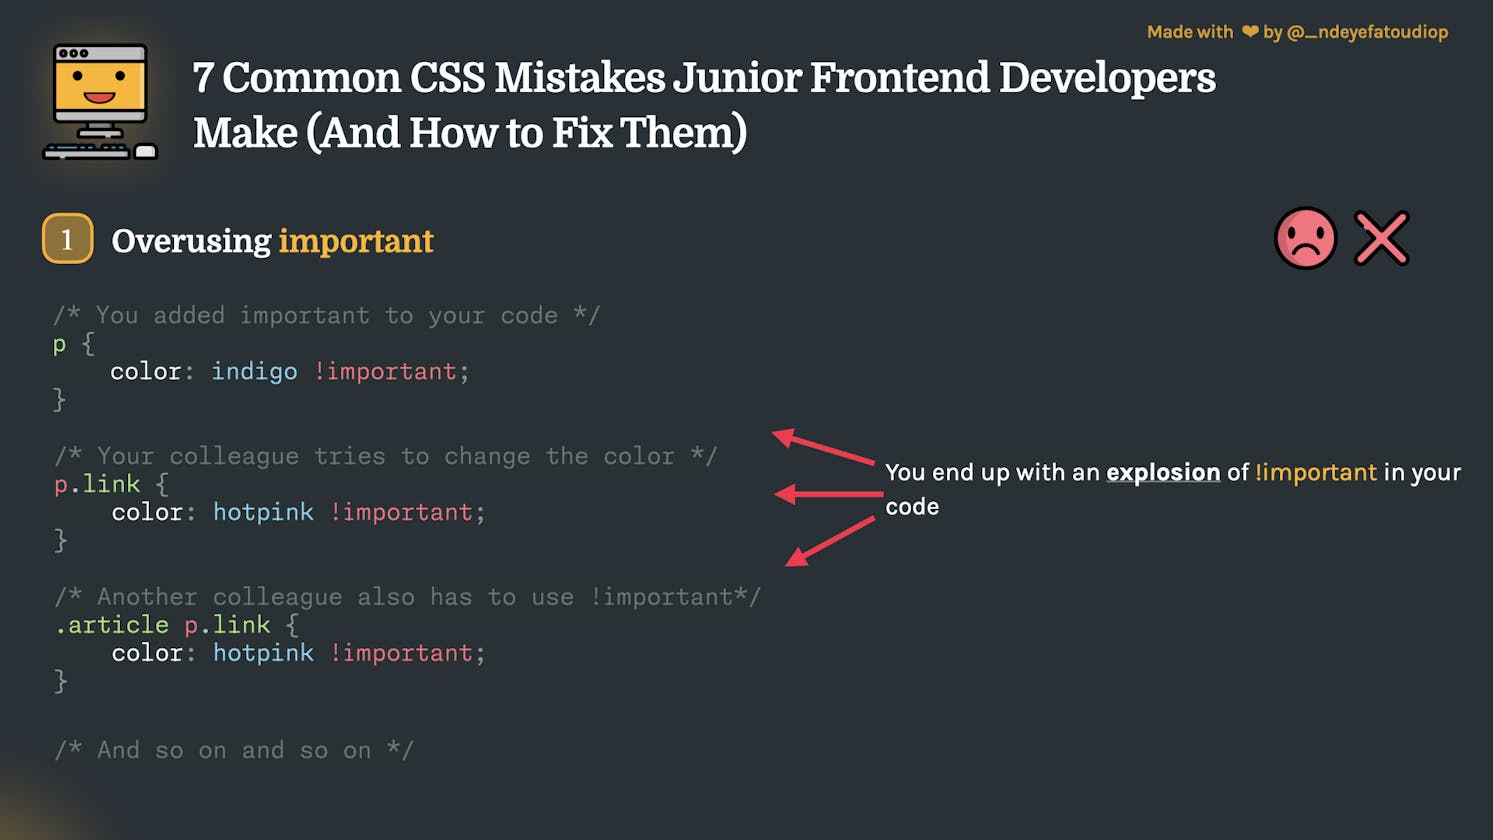 7 Common CSS Mistakes Junior Frontend Developers Make (And How to Fix Them)